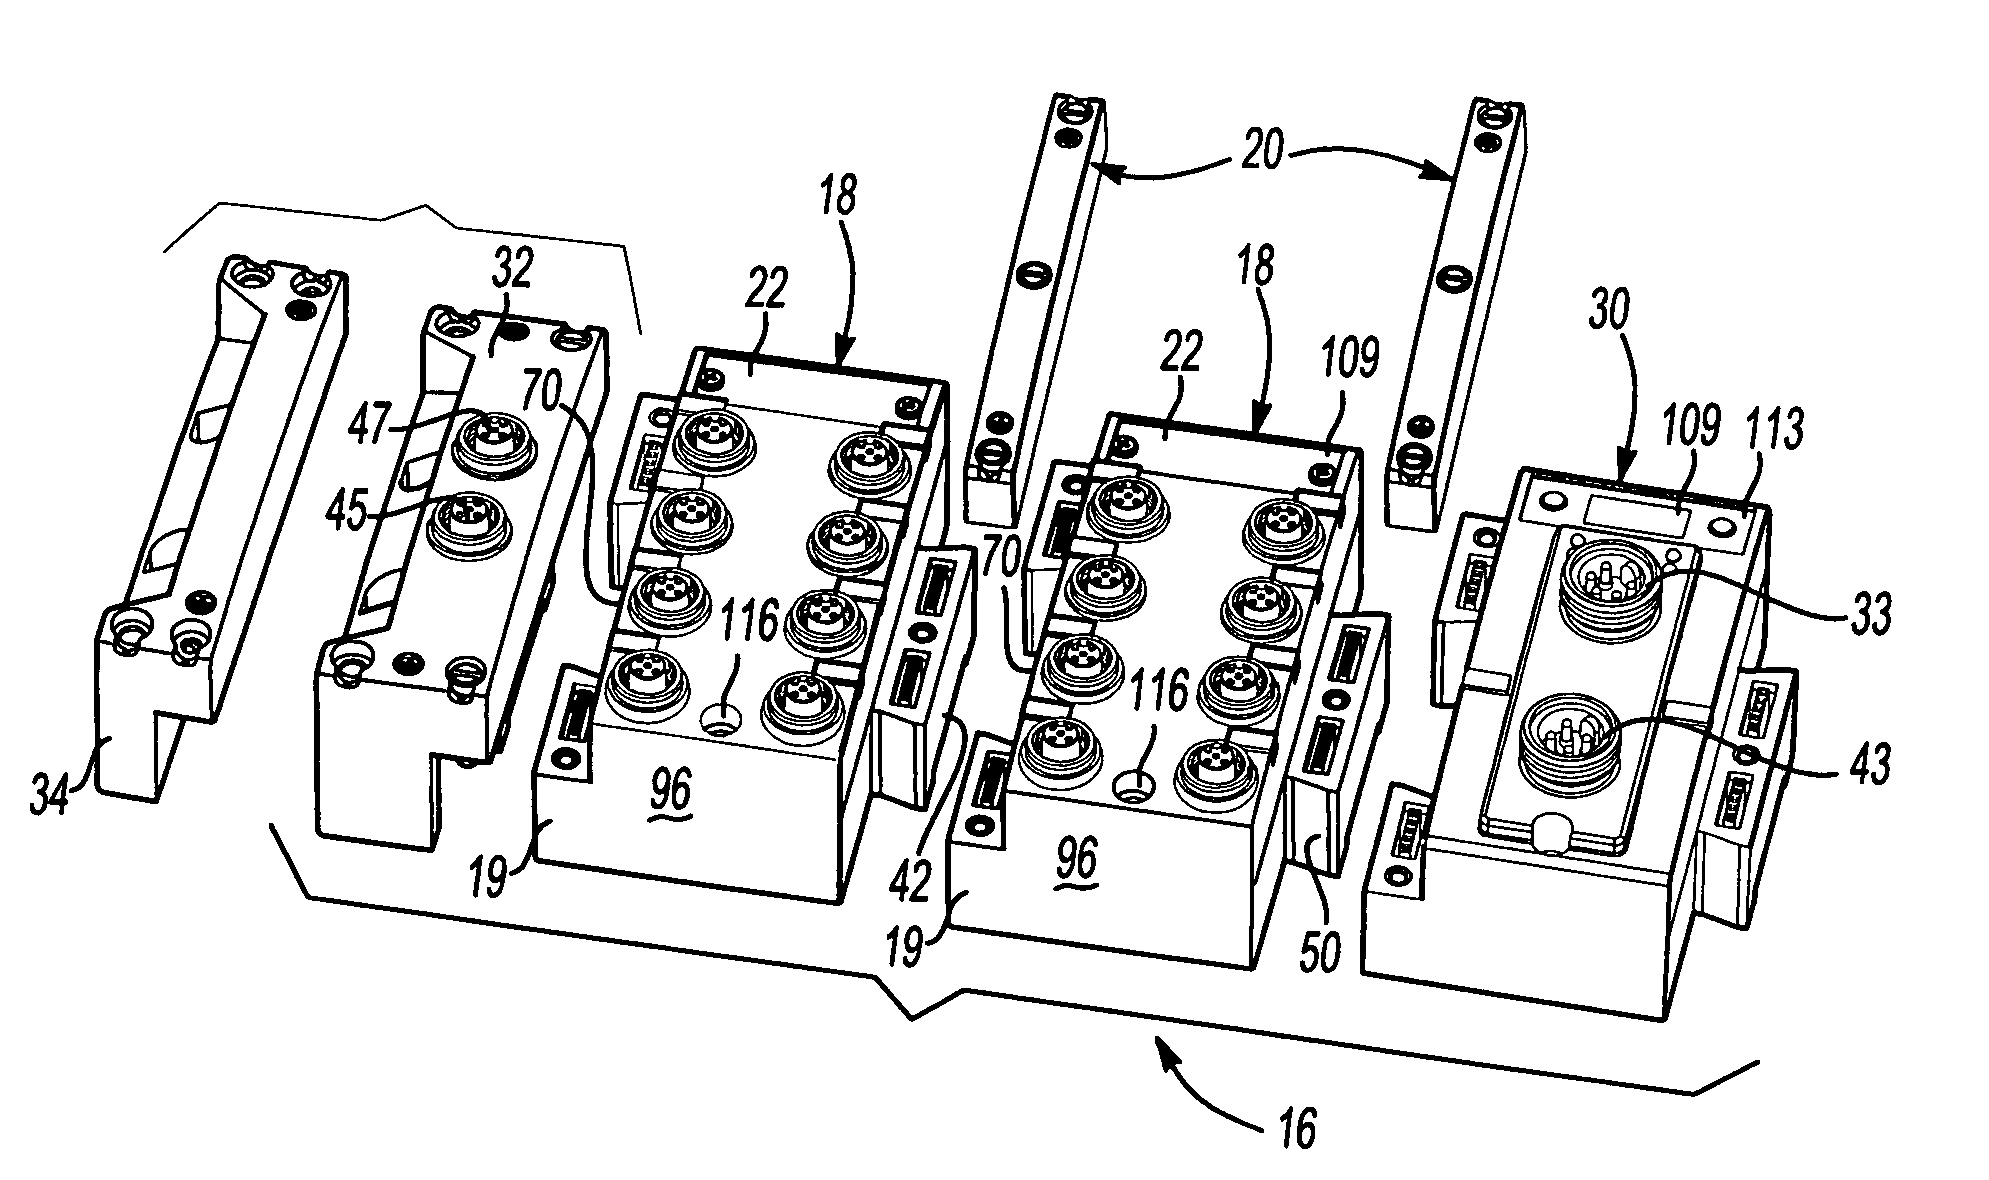 Modular electrical bus system with built in ground circuit